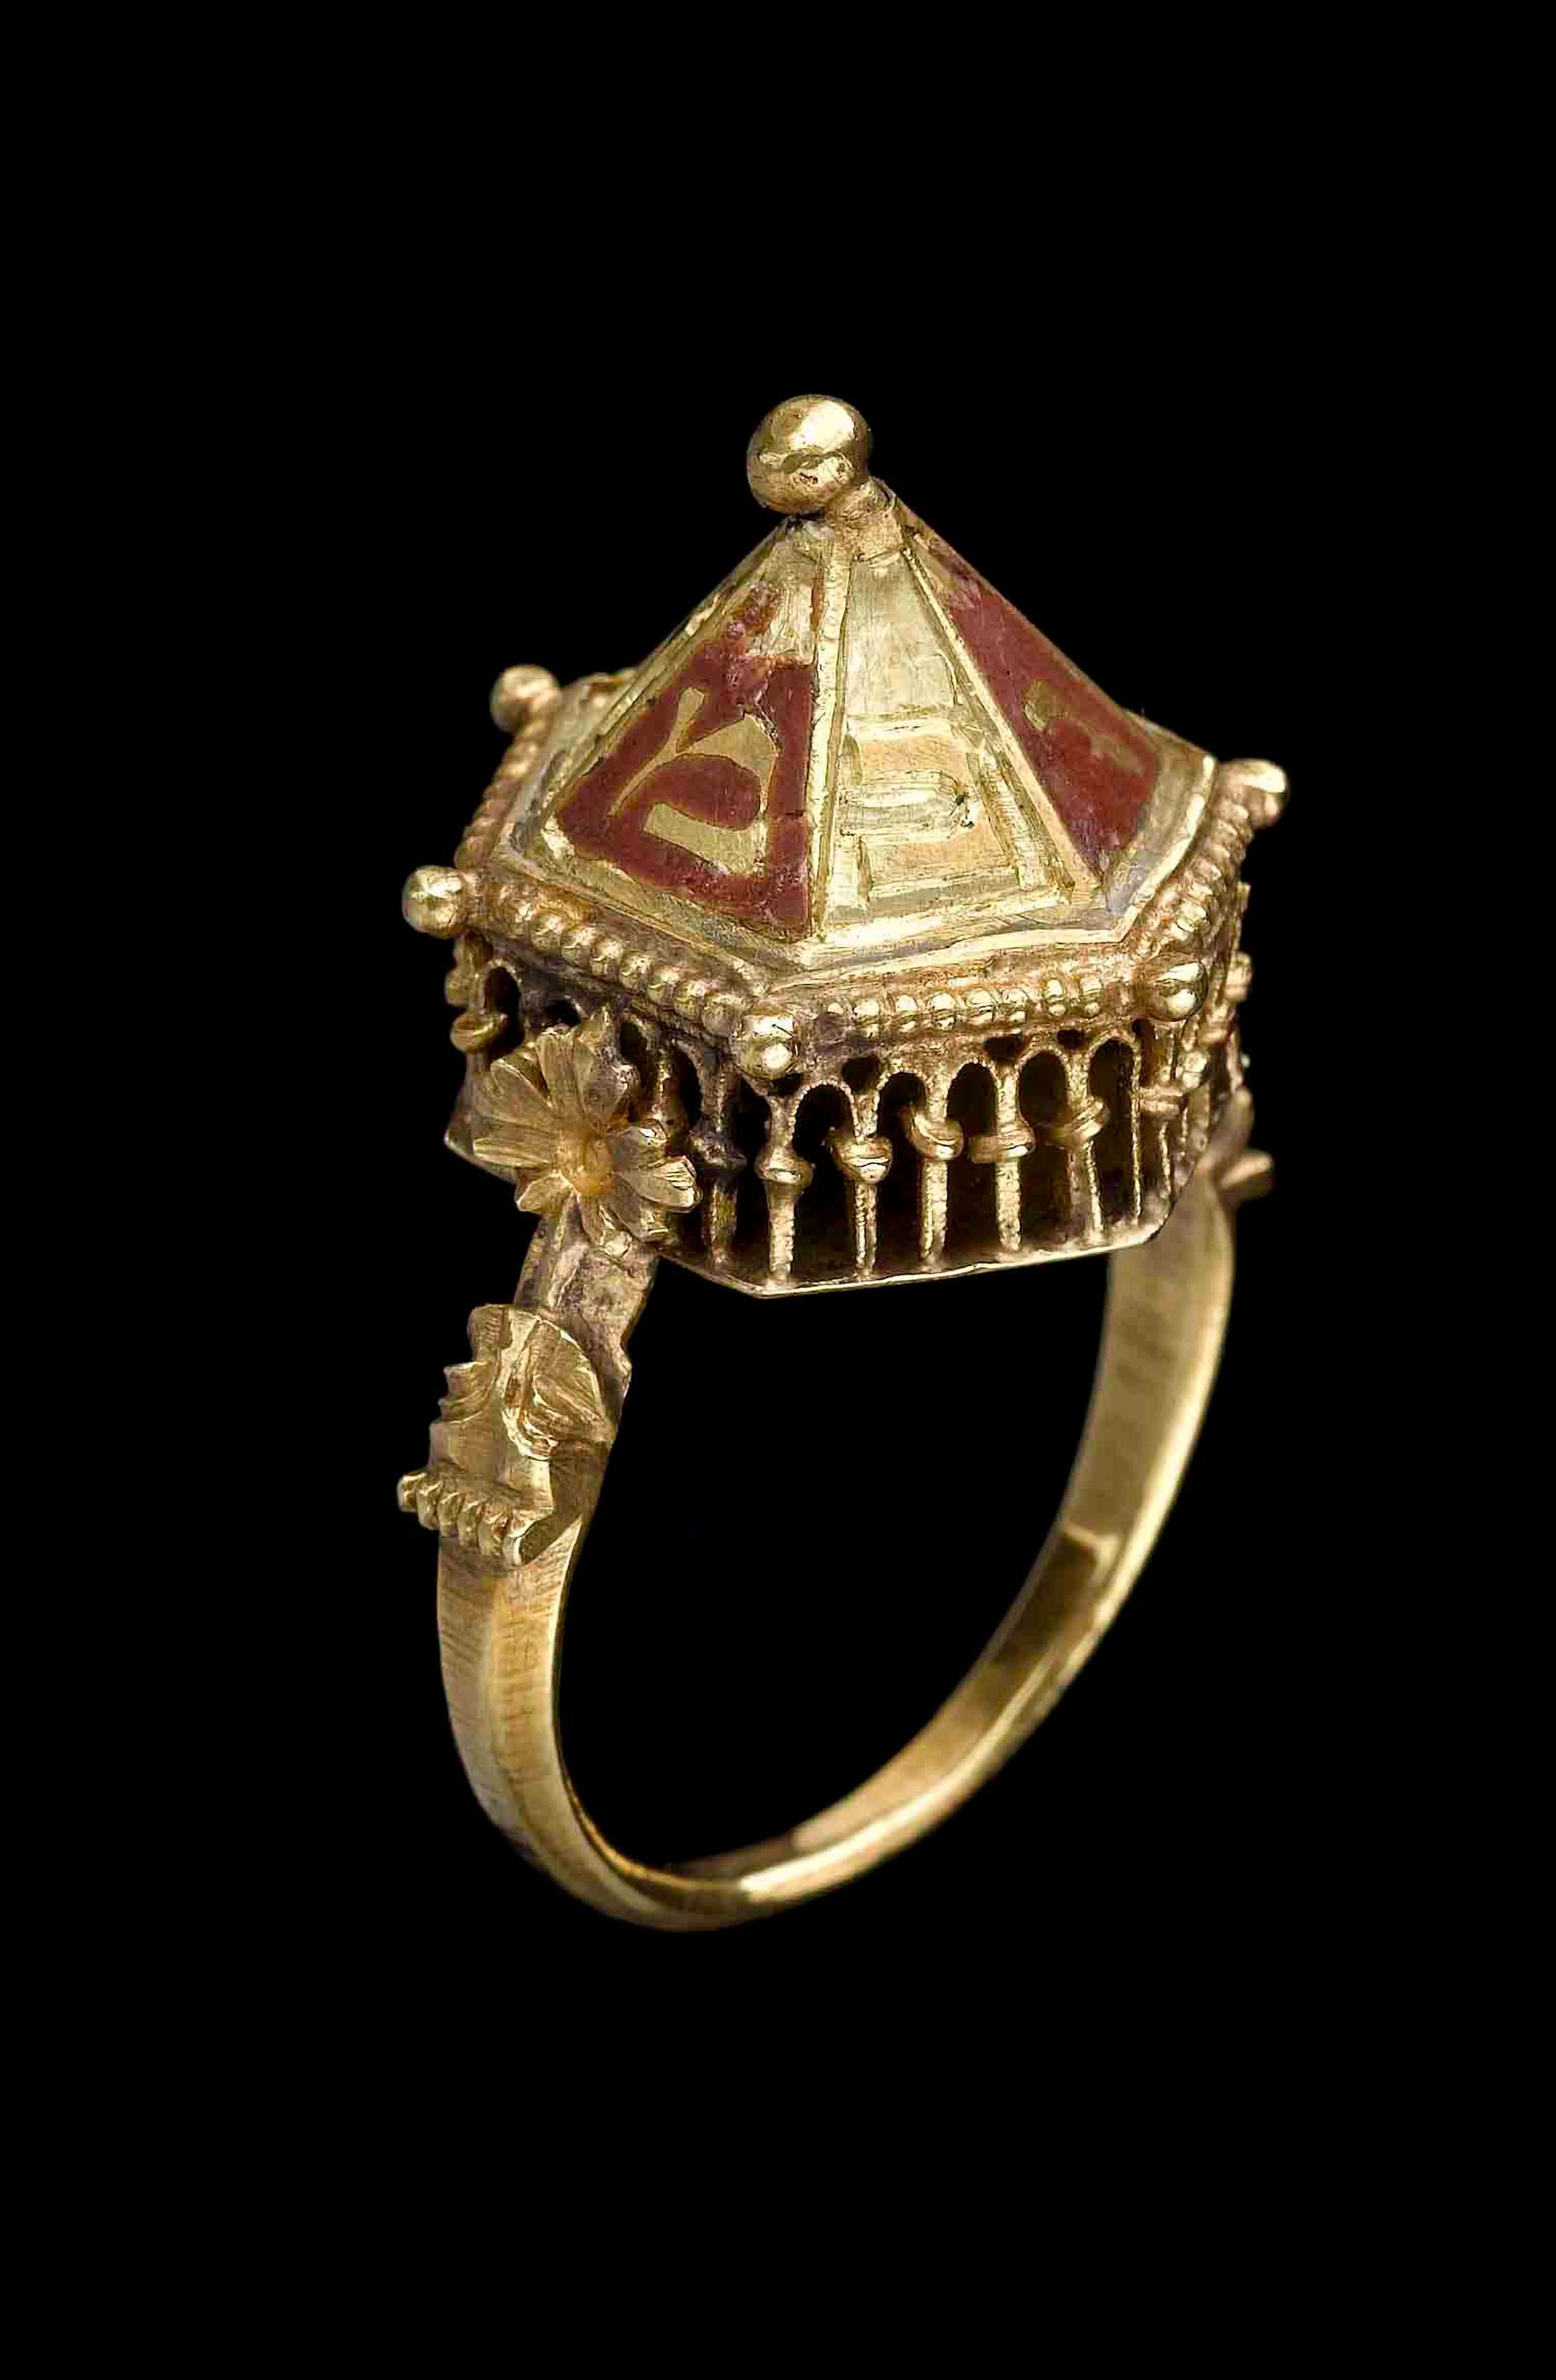 Jewish wedding ring (around 1300-48) Courtesy of the Musée de Cluny – Musée national du Moyen Âge, © RMN-Grand Palais / Art Resource, NY (Cl.20685)